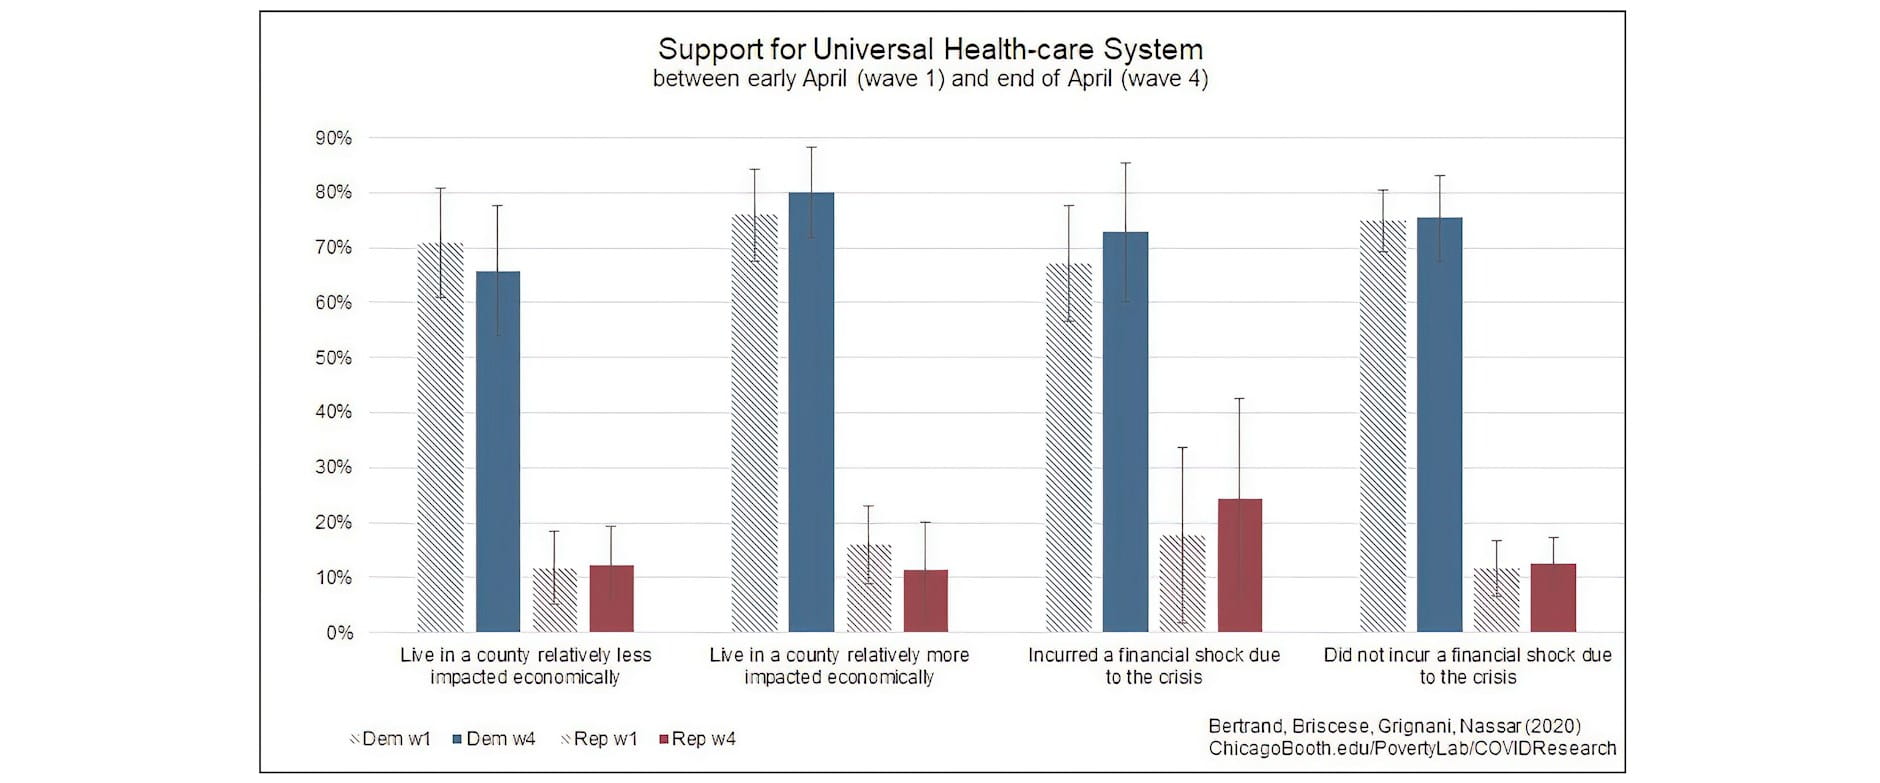 Bar graph showing support for universal health-care system